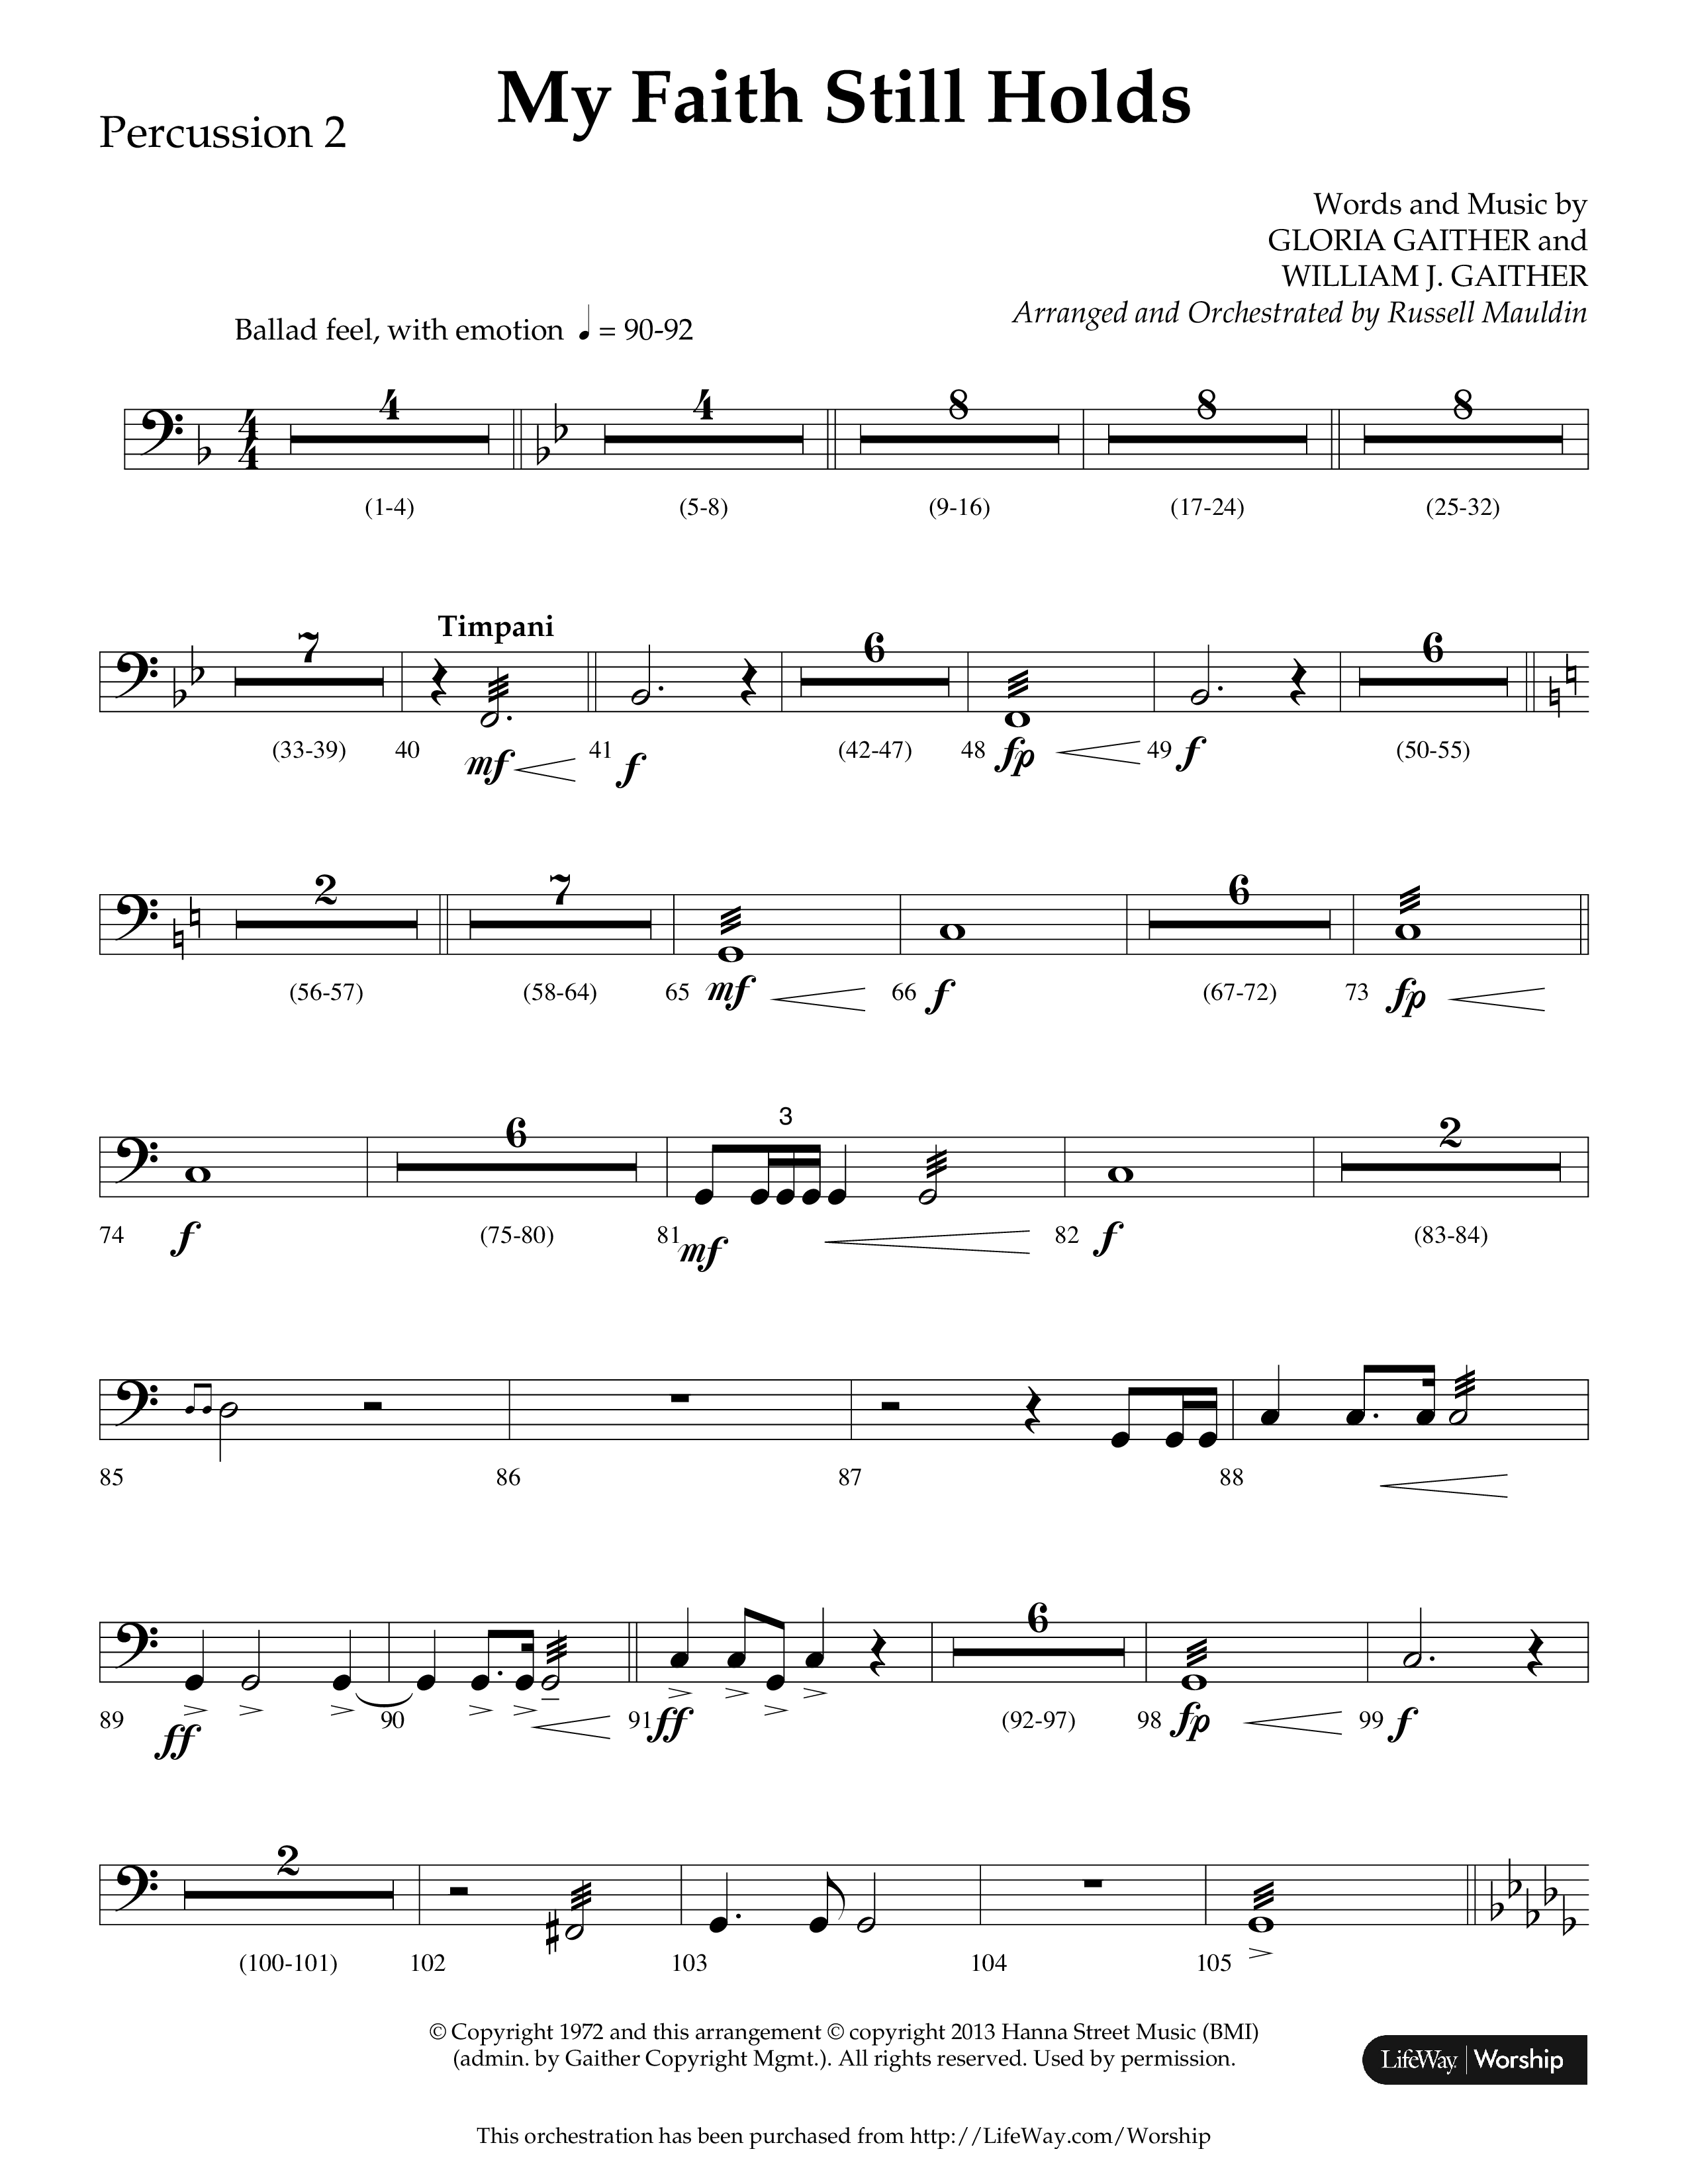 My Faith Still Holds (Choral Anthem SATB) Percussion 1/2 (Lifeway Choral / Arr. Russell Mauldin)